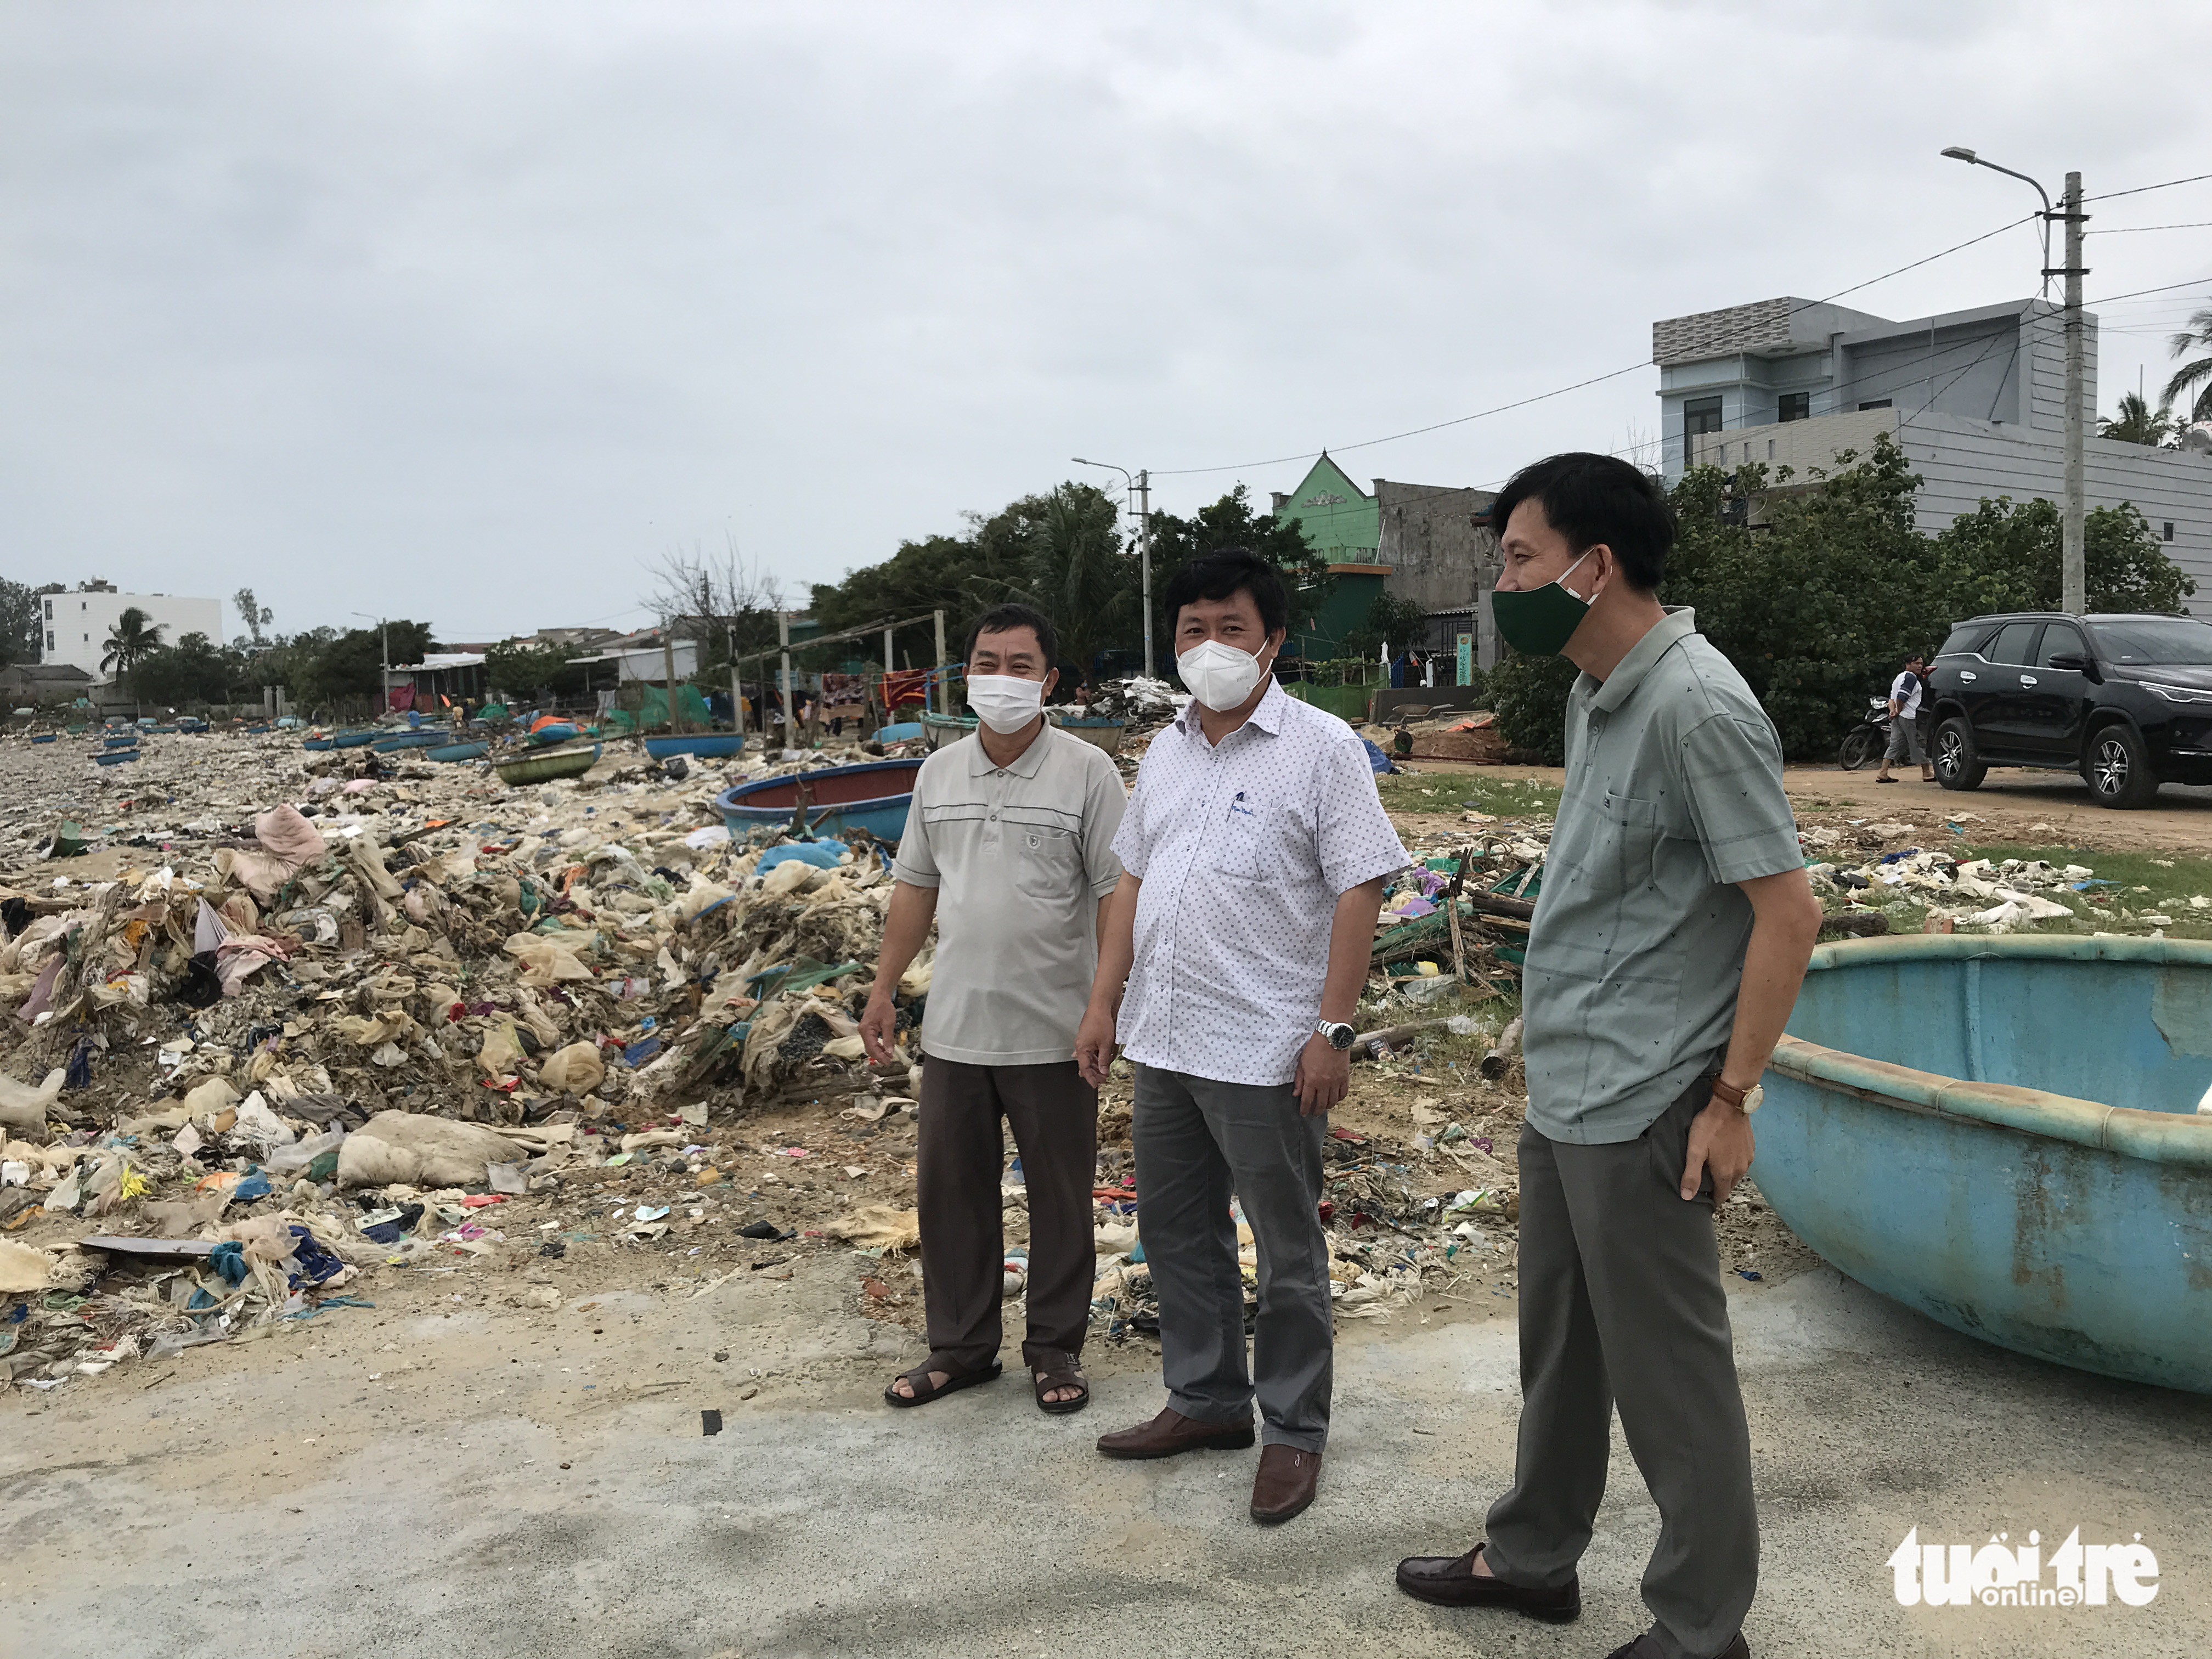 Officers evaluate the impacts of trash piled up on beaches in Tinh Ky Commune in Quang Ngai City, Quang Ngai Province, Vietnam, January 1, 2022. Photo: T.M. / Tuoi Tre